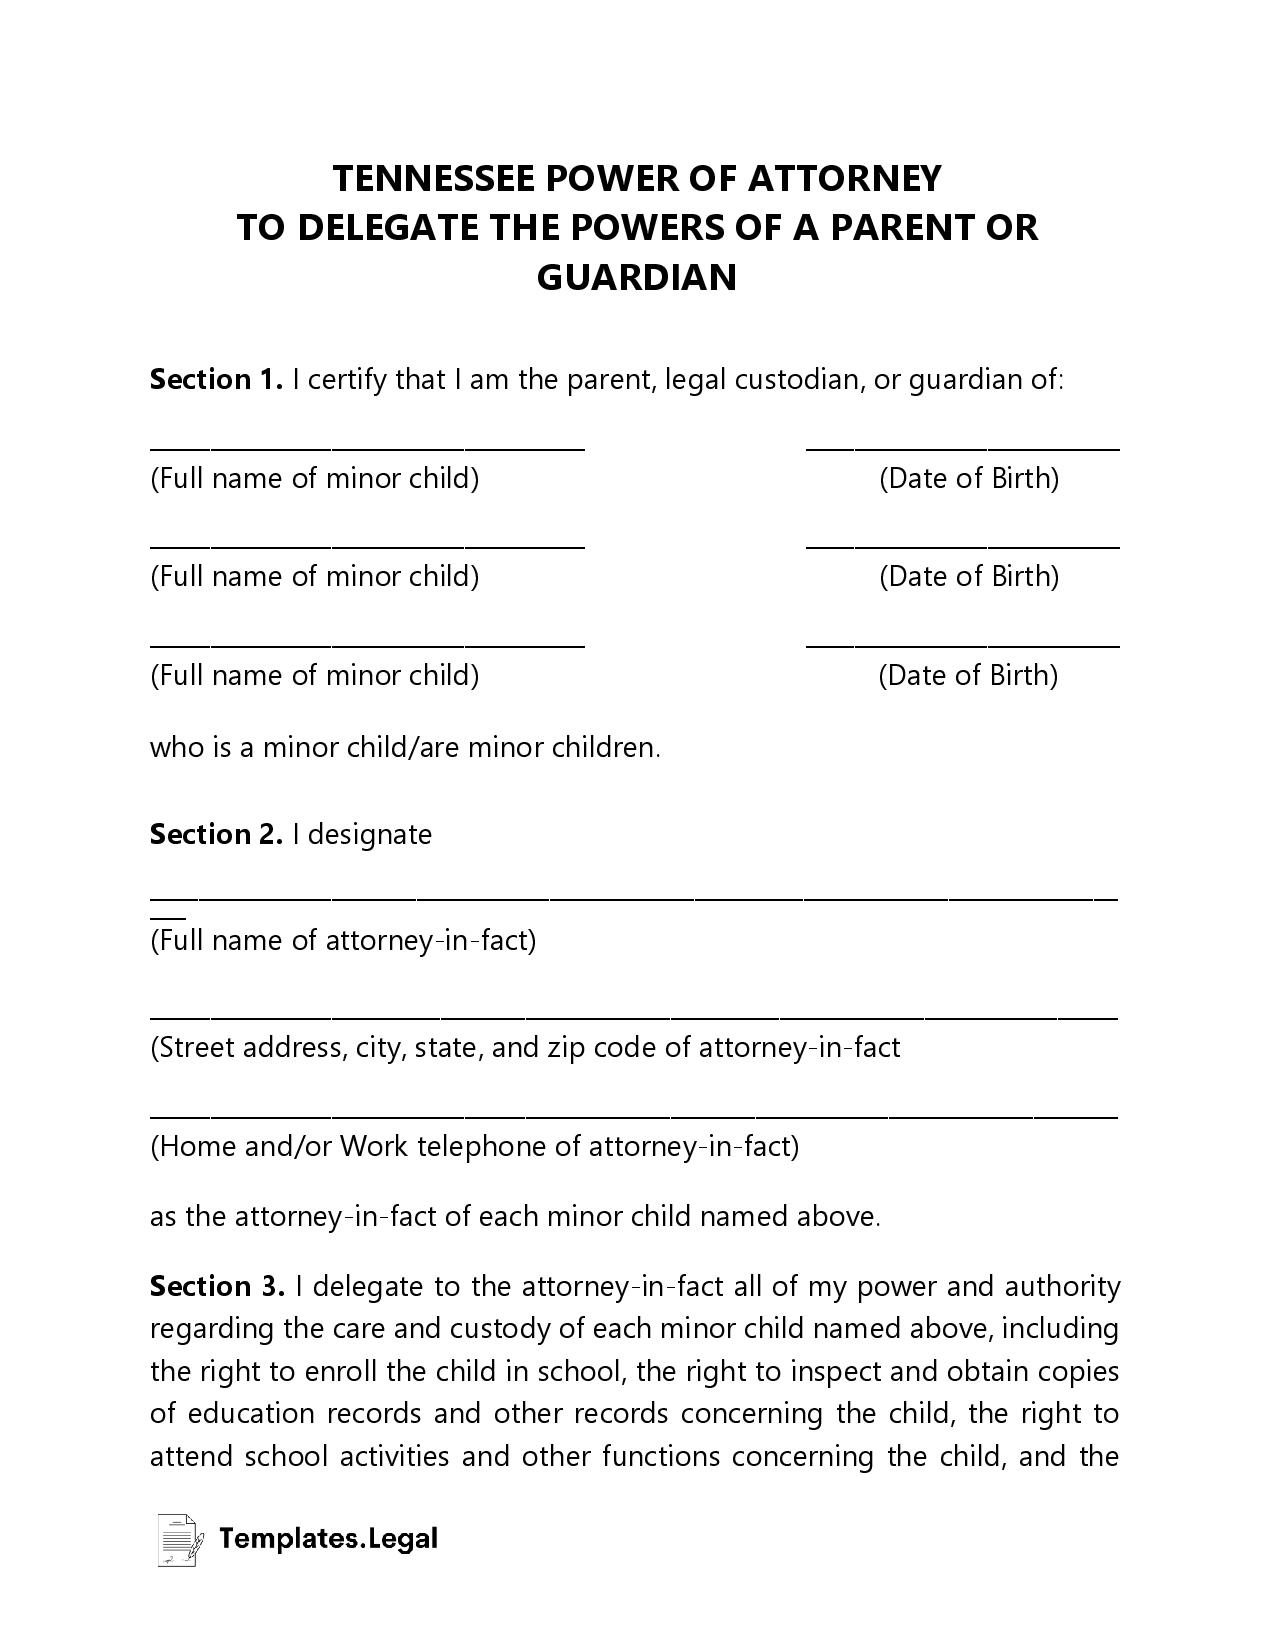 Tennessee Minor (Child) Power of Attorney - Templates.Legal